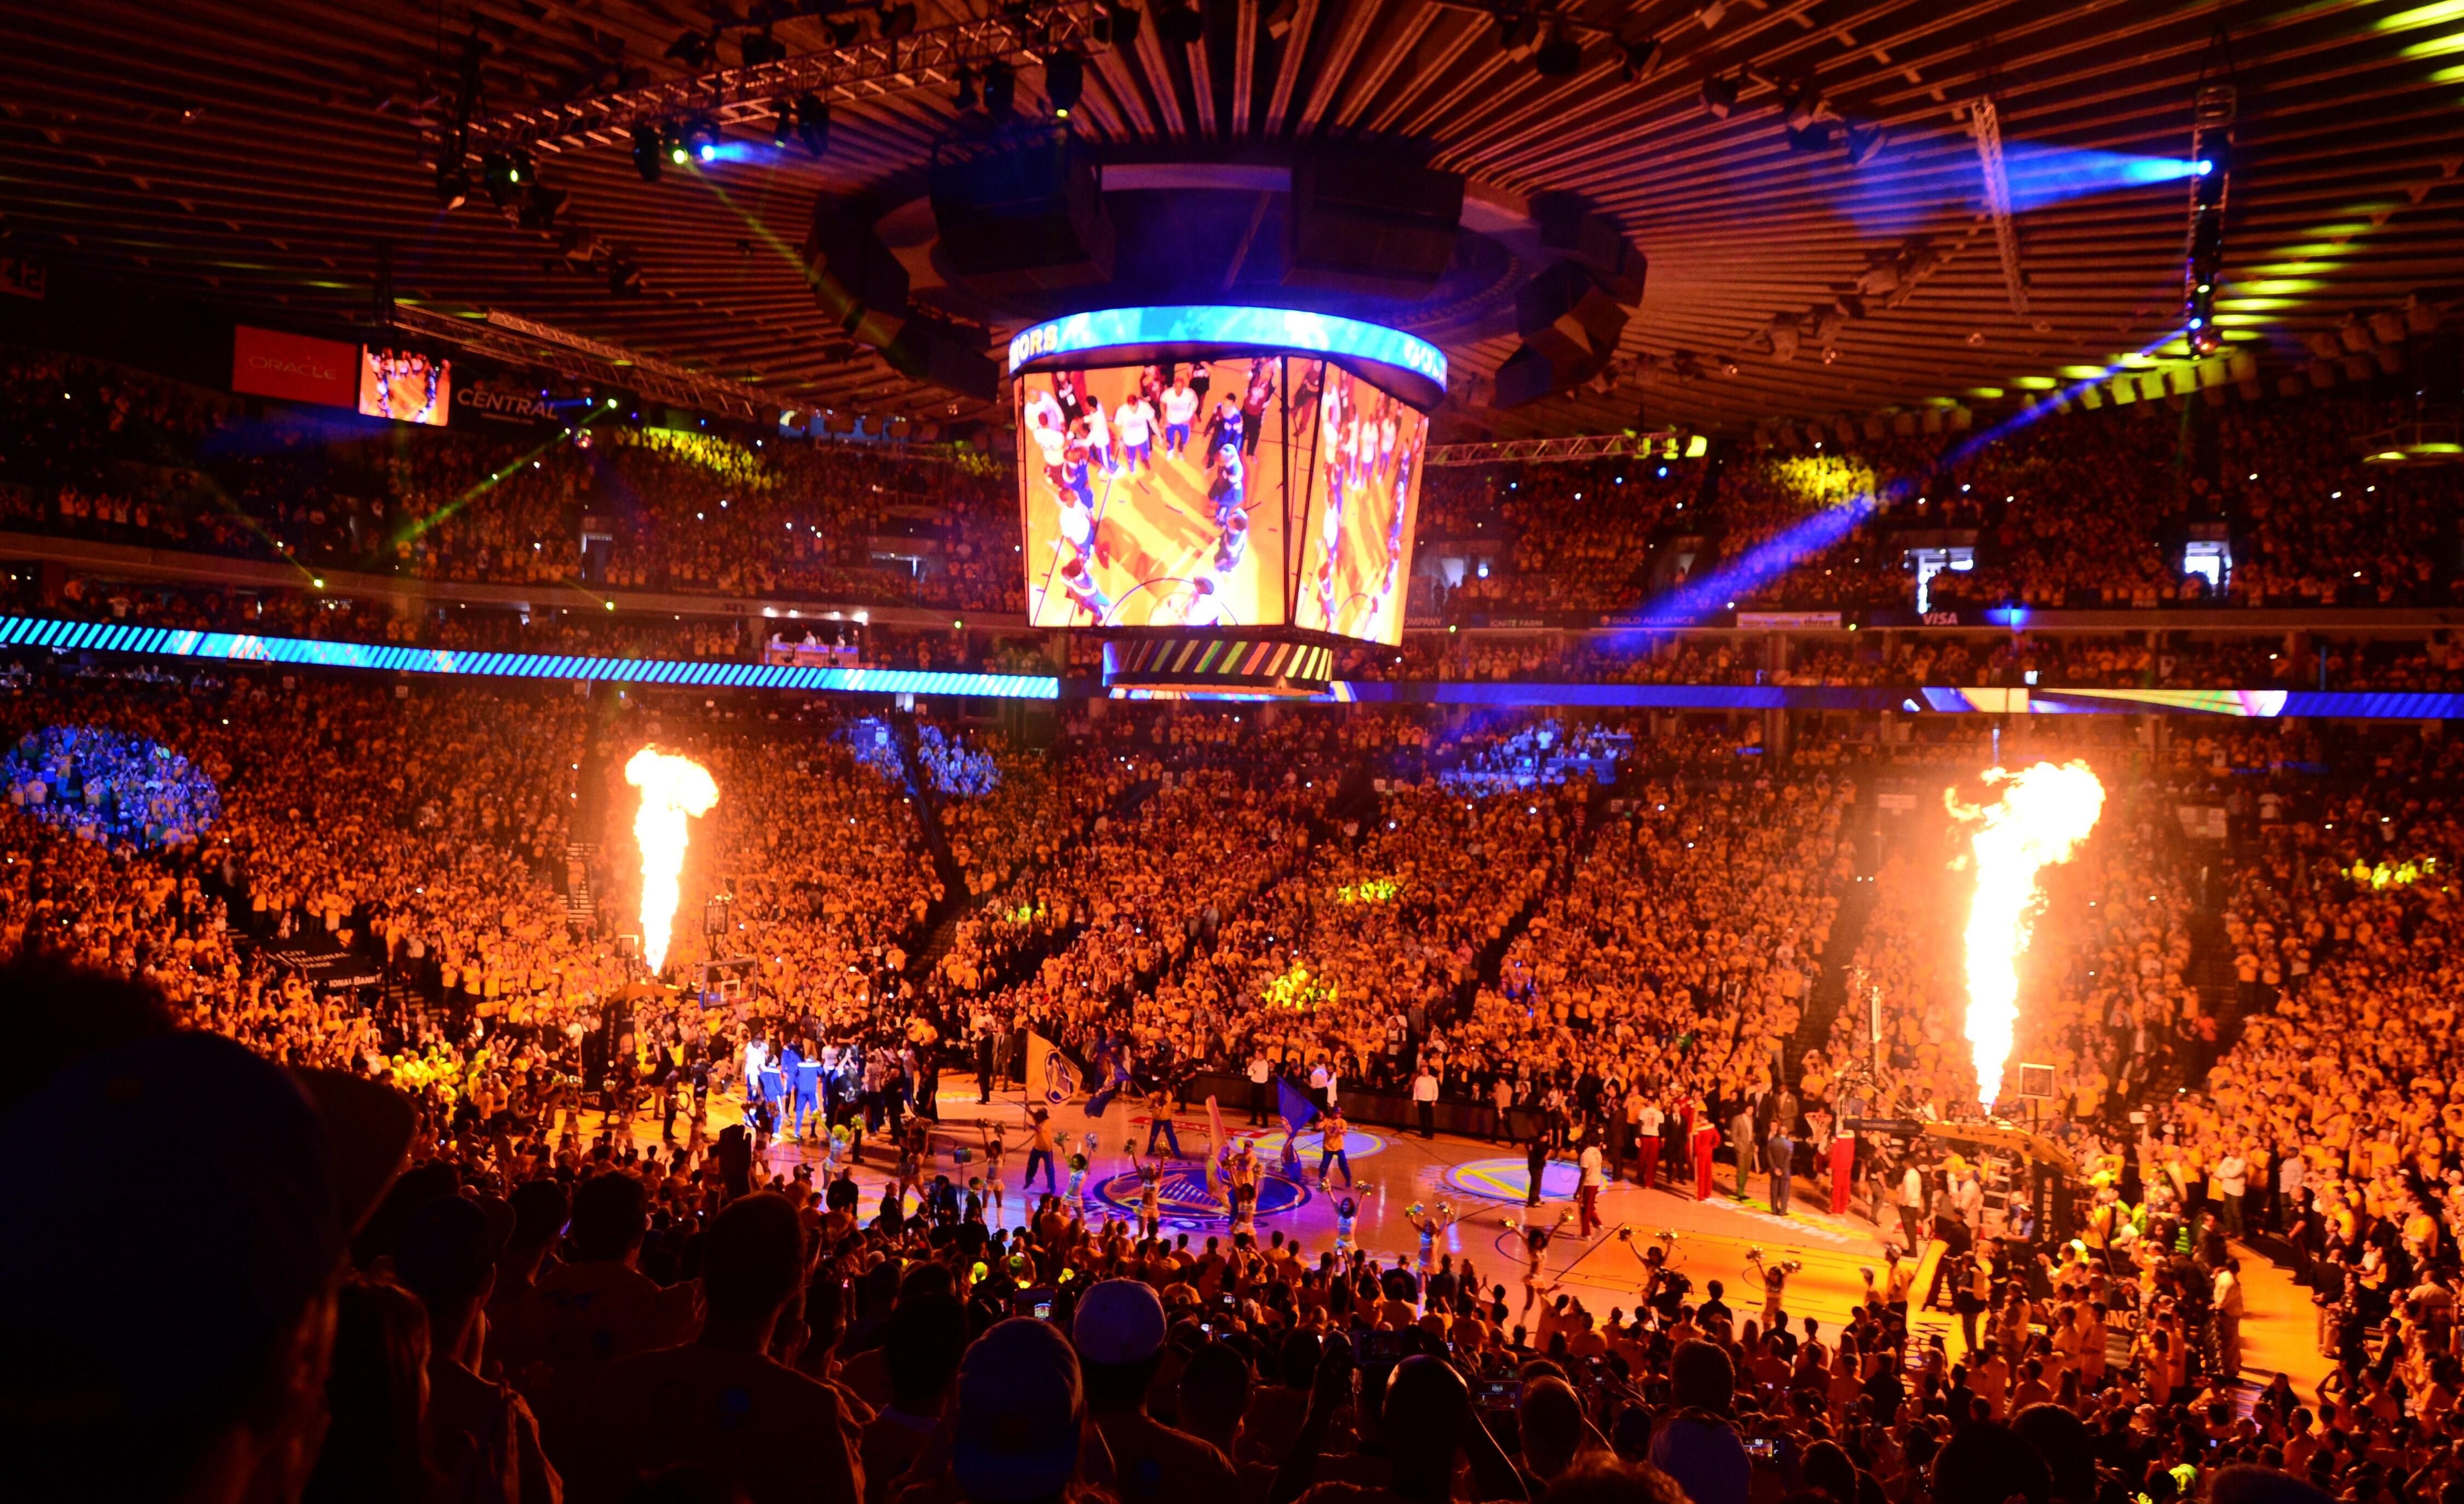 Players from the Golden State Warriors and Cleveland Cavaliers are introduced prior to the start of Game 5 of the 2015 NBA Finals on June 14, 2015 at the Oracle Arena in Oakland, California. The Warriors defeated the Cavaliers 104-91 to lead the best of s